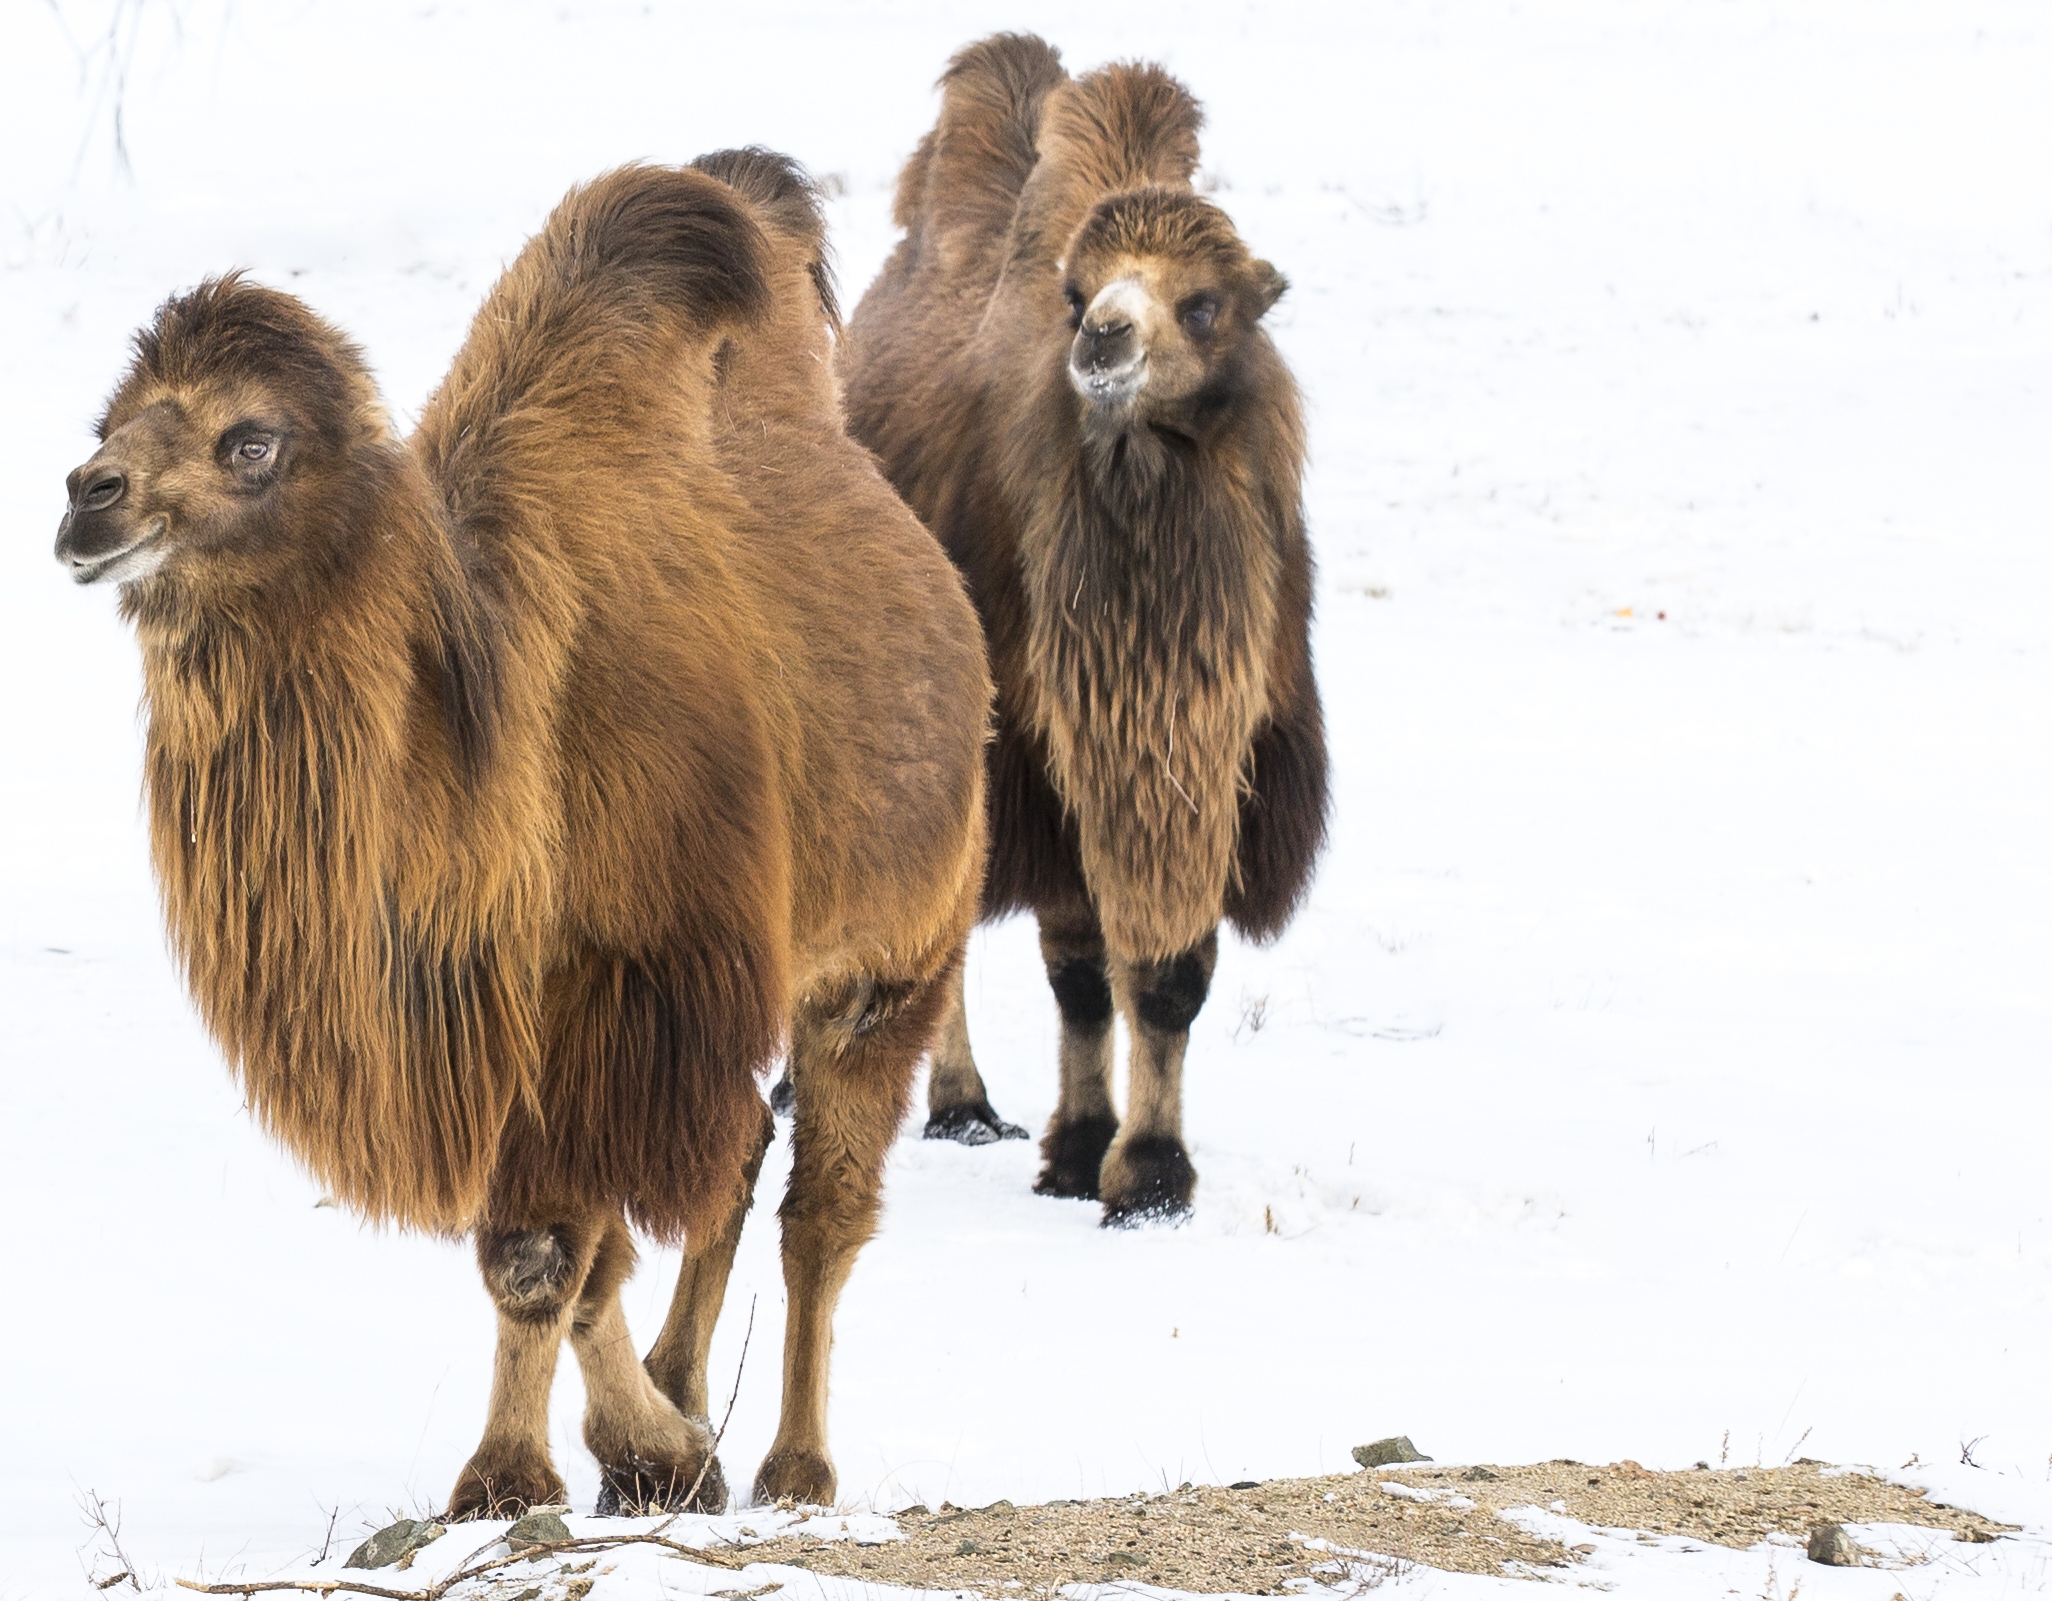 Bactrian camels during our Mongolia winter trip experience